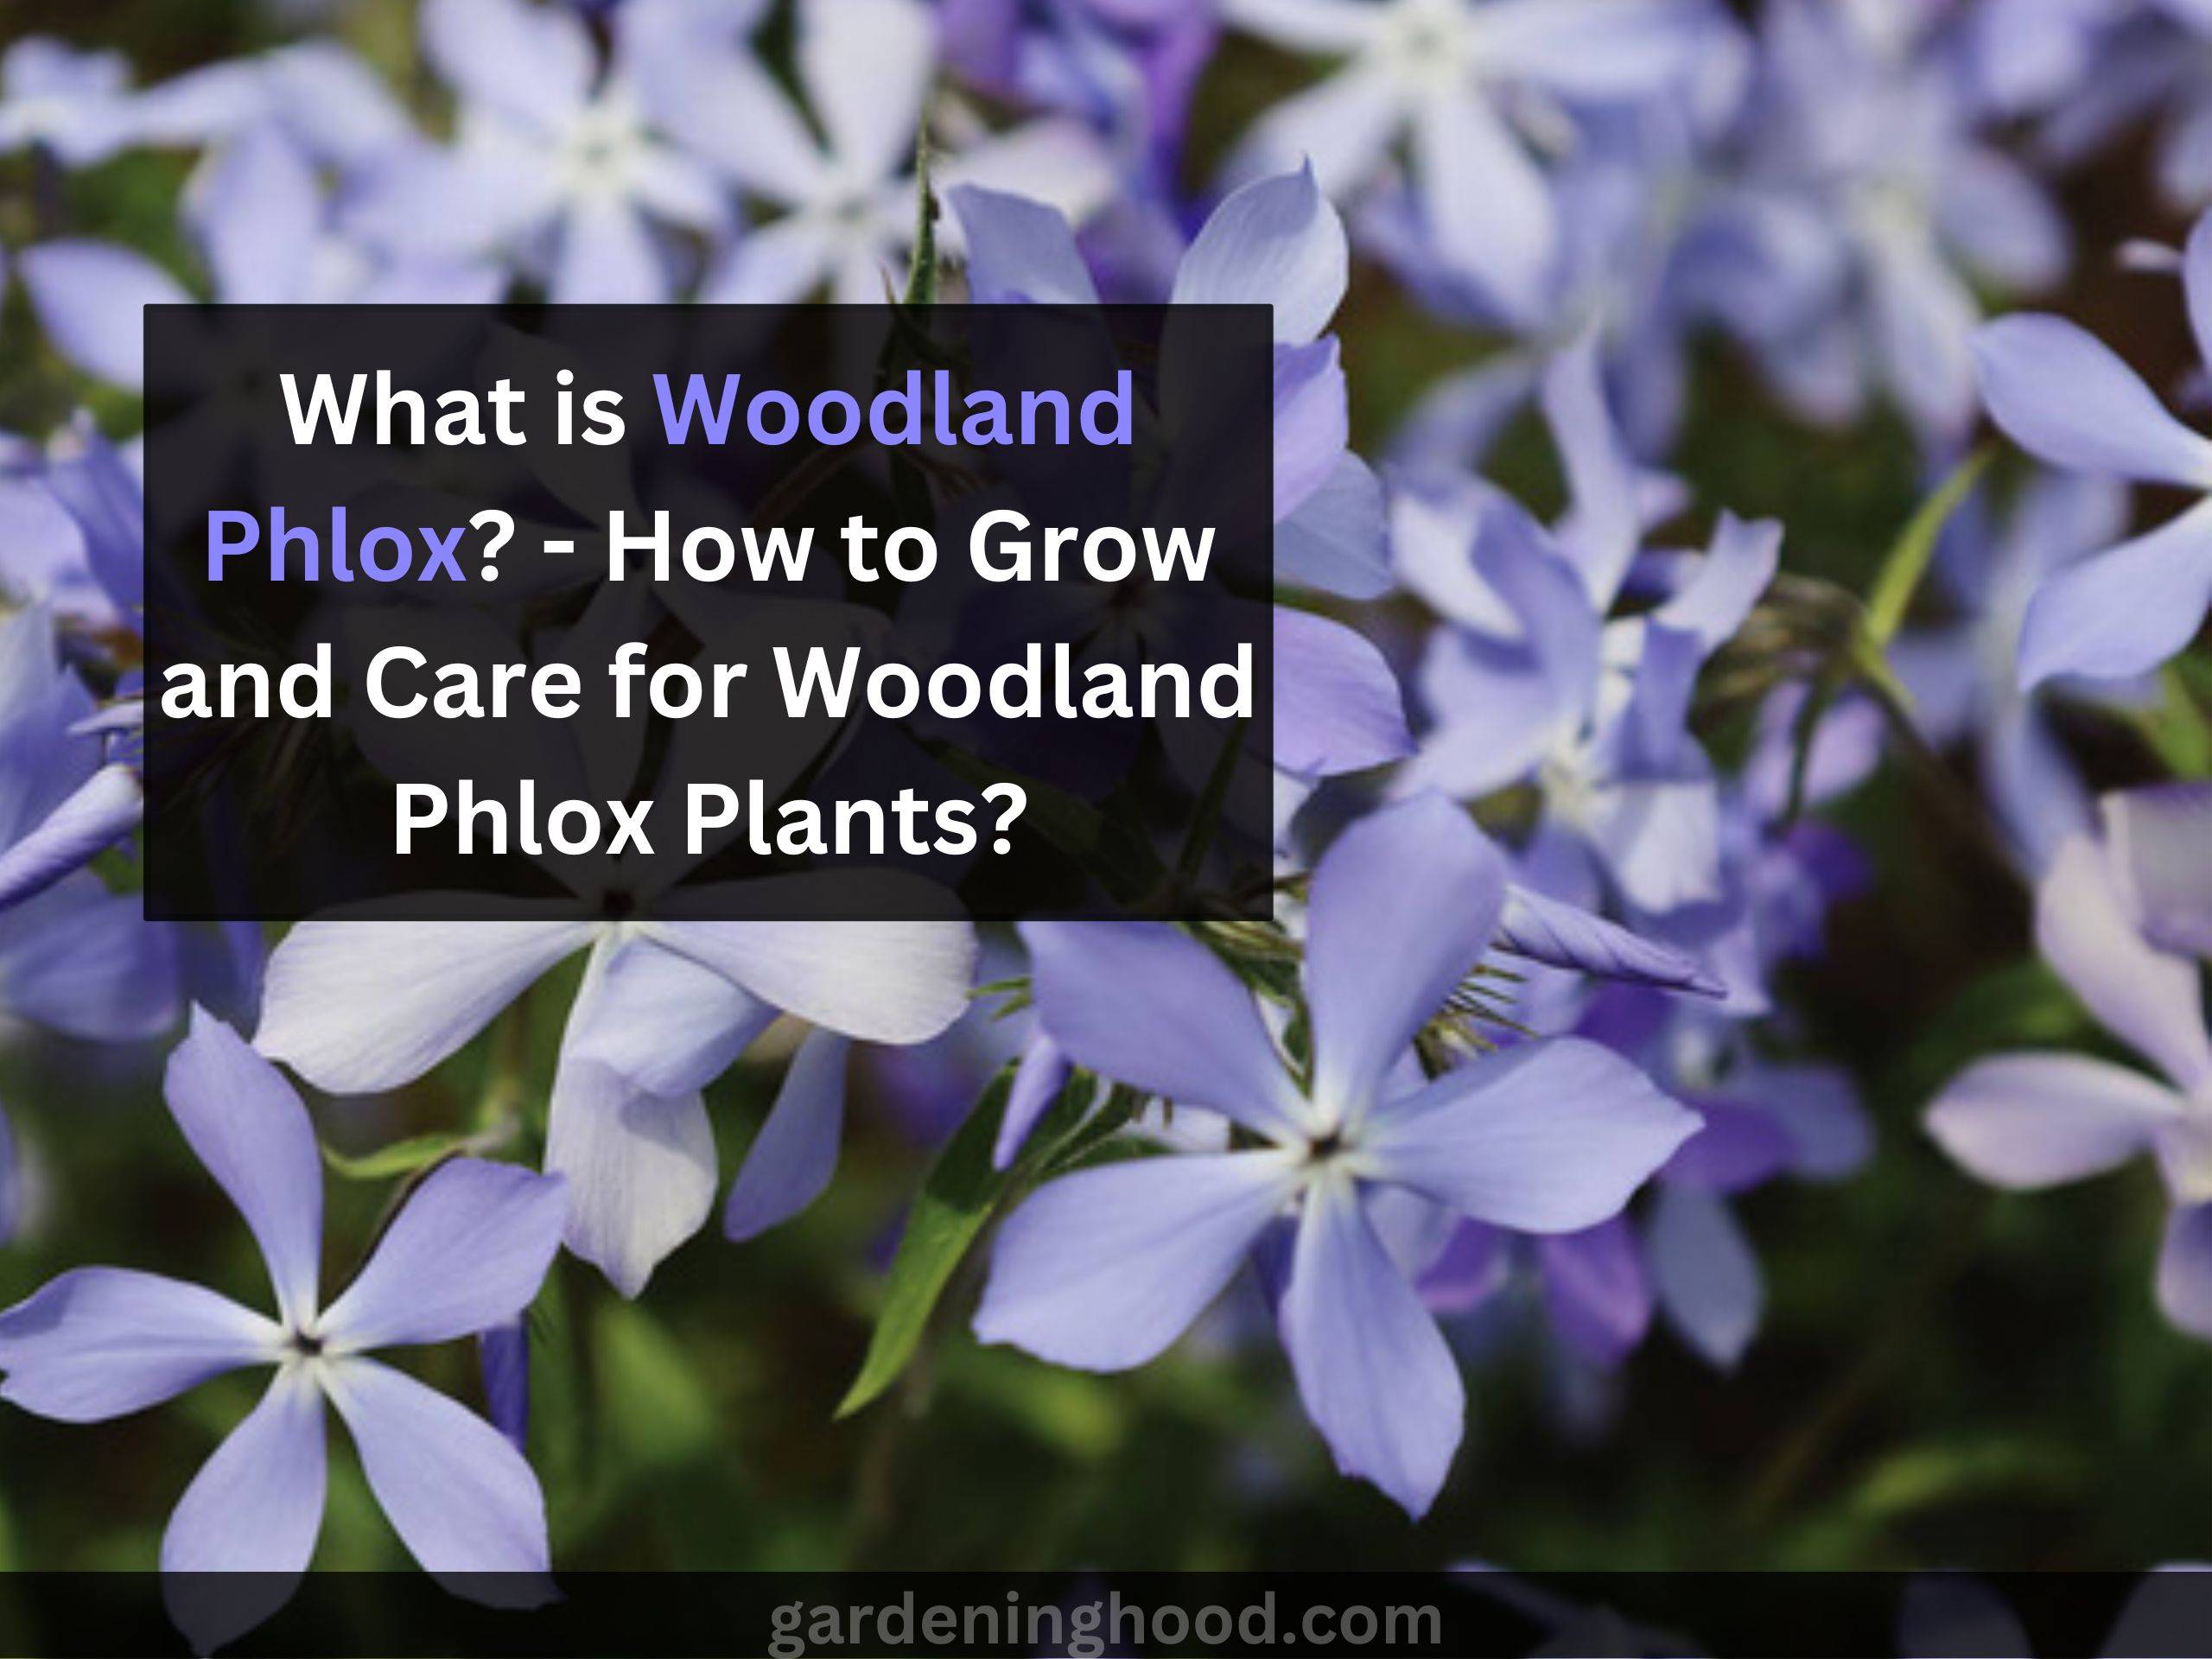 What is Woodland Phlox? - How to Grow and Care for Woodland Phlox Plants?